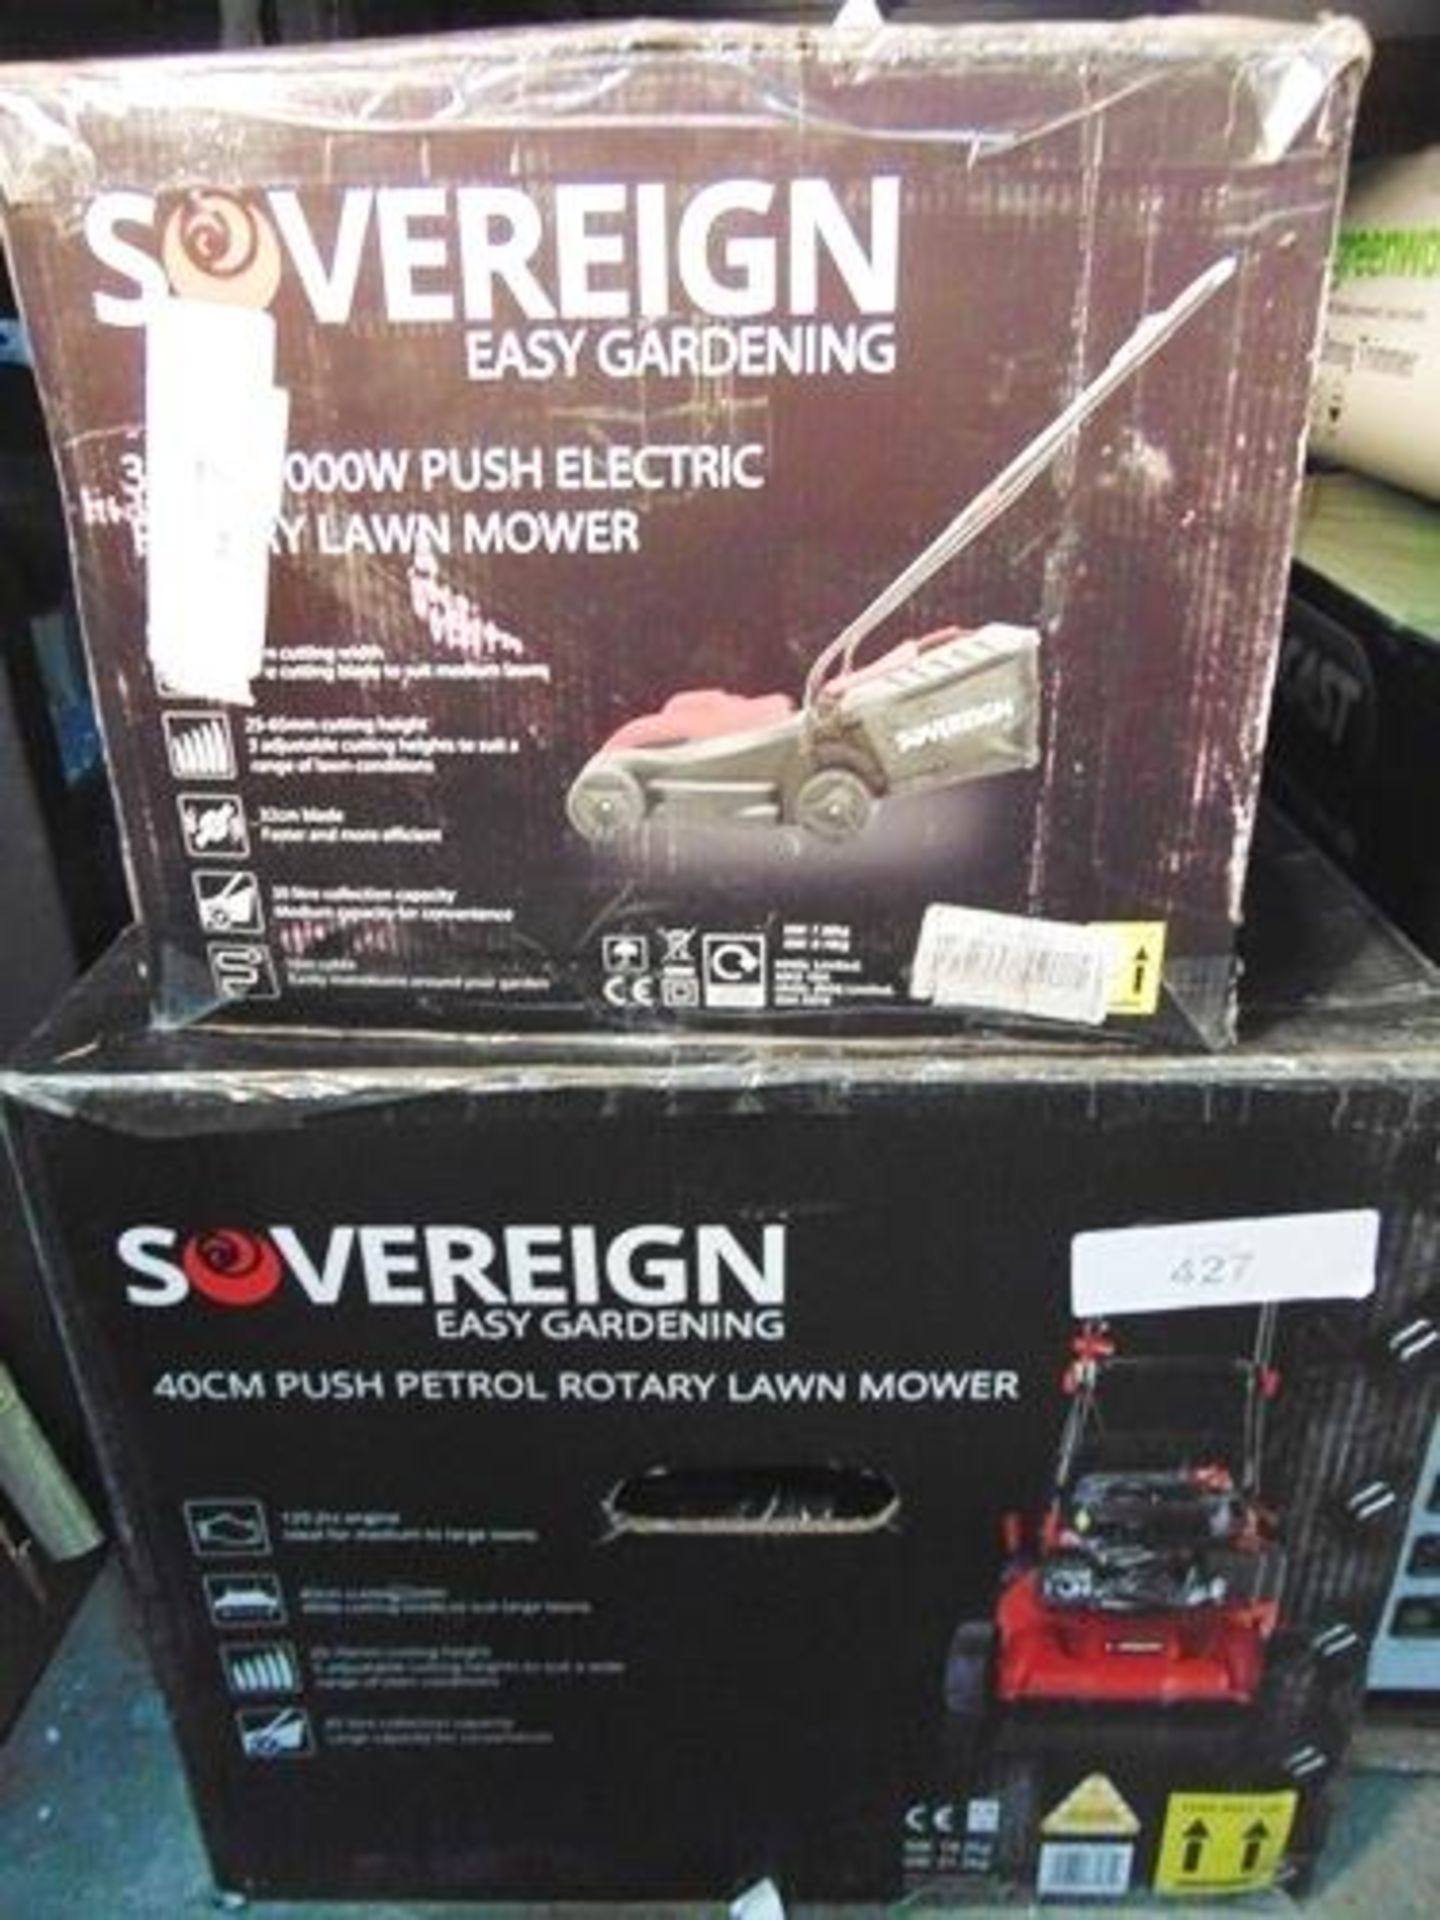 A Sovereign 40cm push petrol rotary lawnmower, together with a Sovereign 32cm 1000W push electric - Image 3 of 3